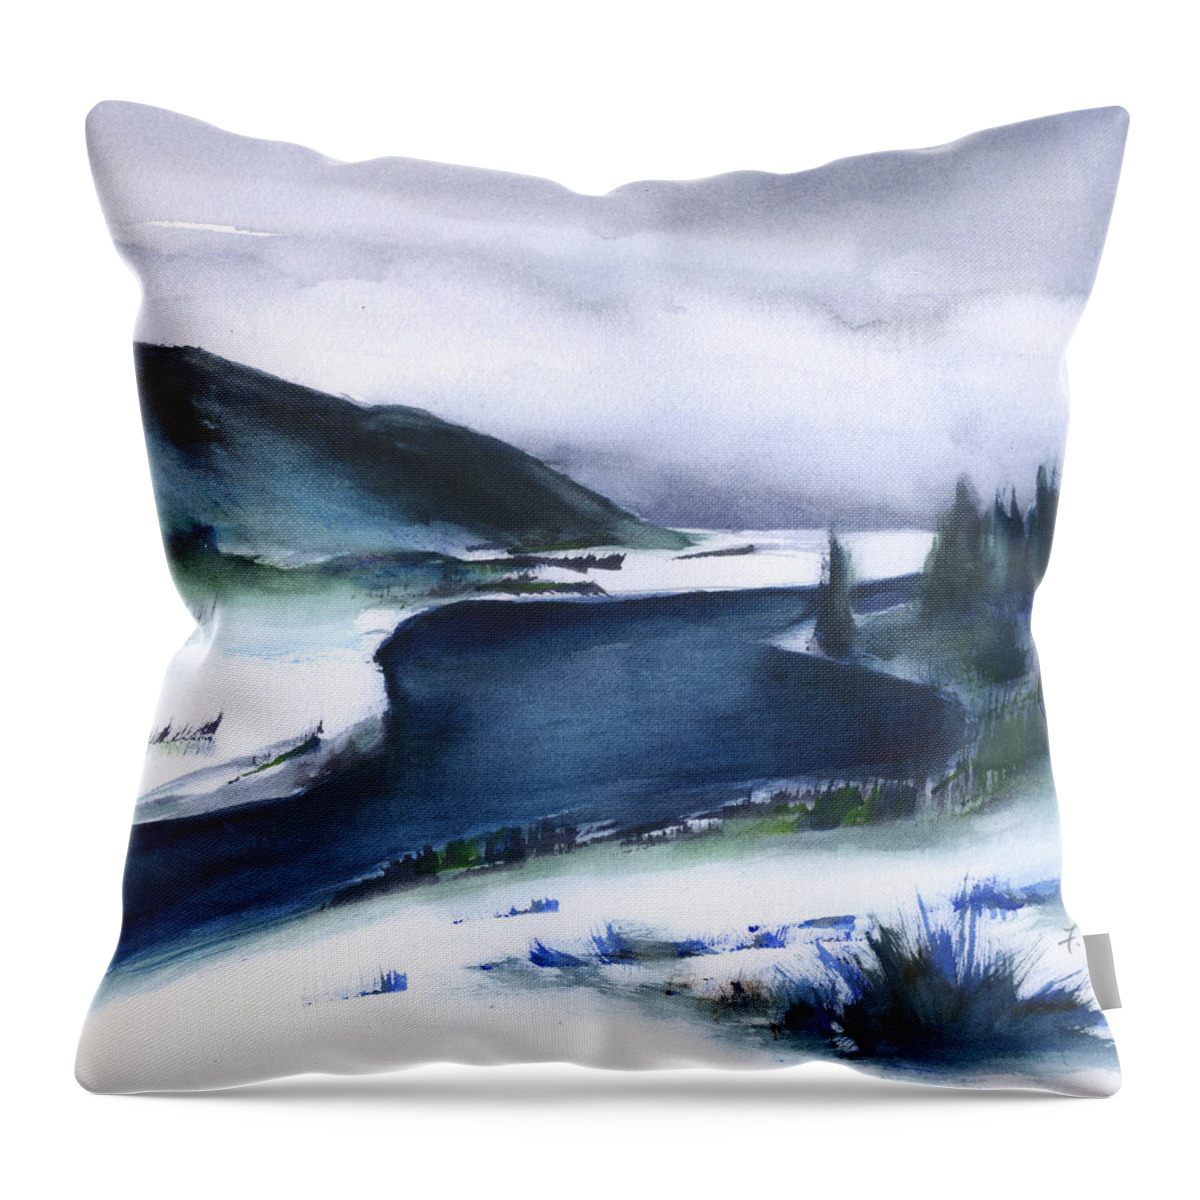 River In Winter Throw Pillow featuring the painting River In Winter by Frank Bright